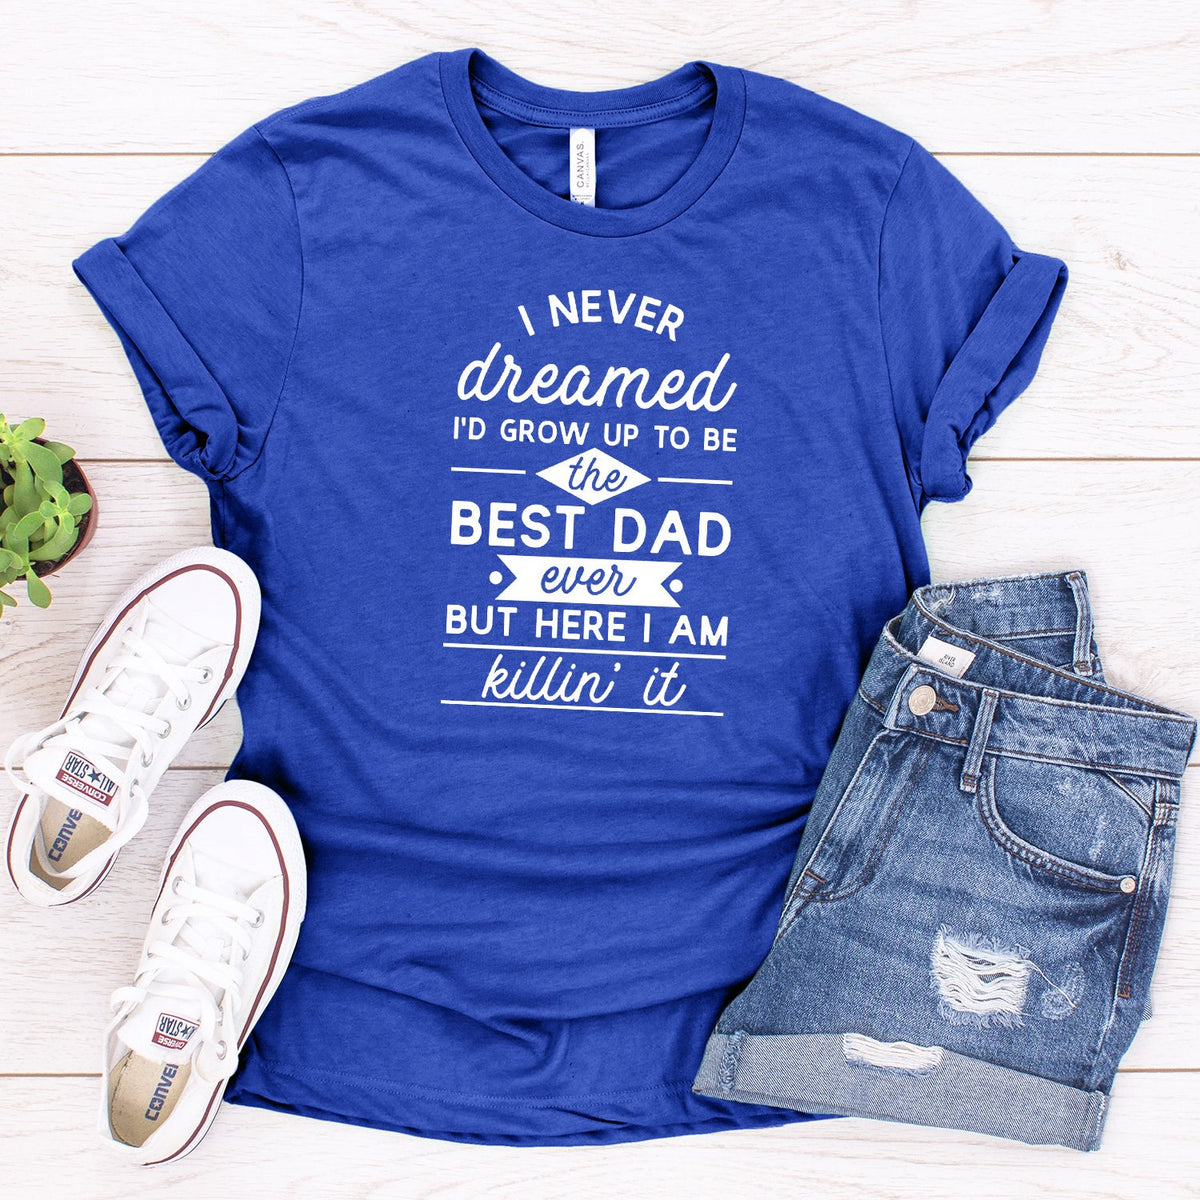 I Never Dreamed I&#39;d Grow up to Be the Best Dad Ever - Short Sleeve Tee Shirt